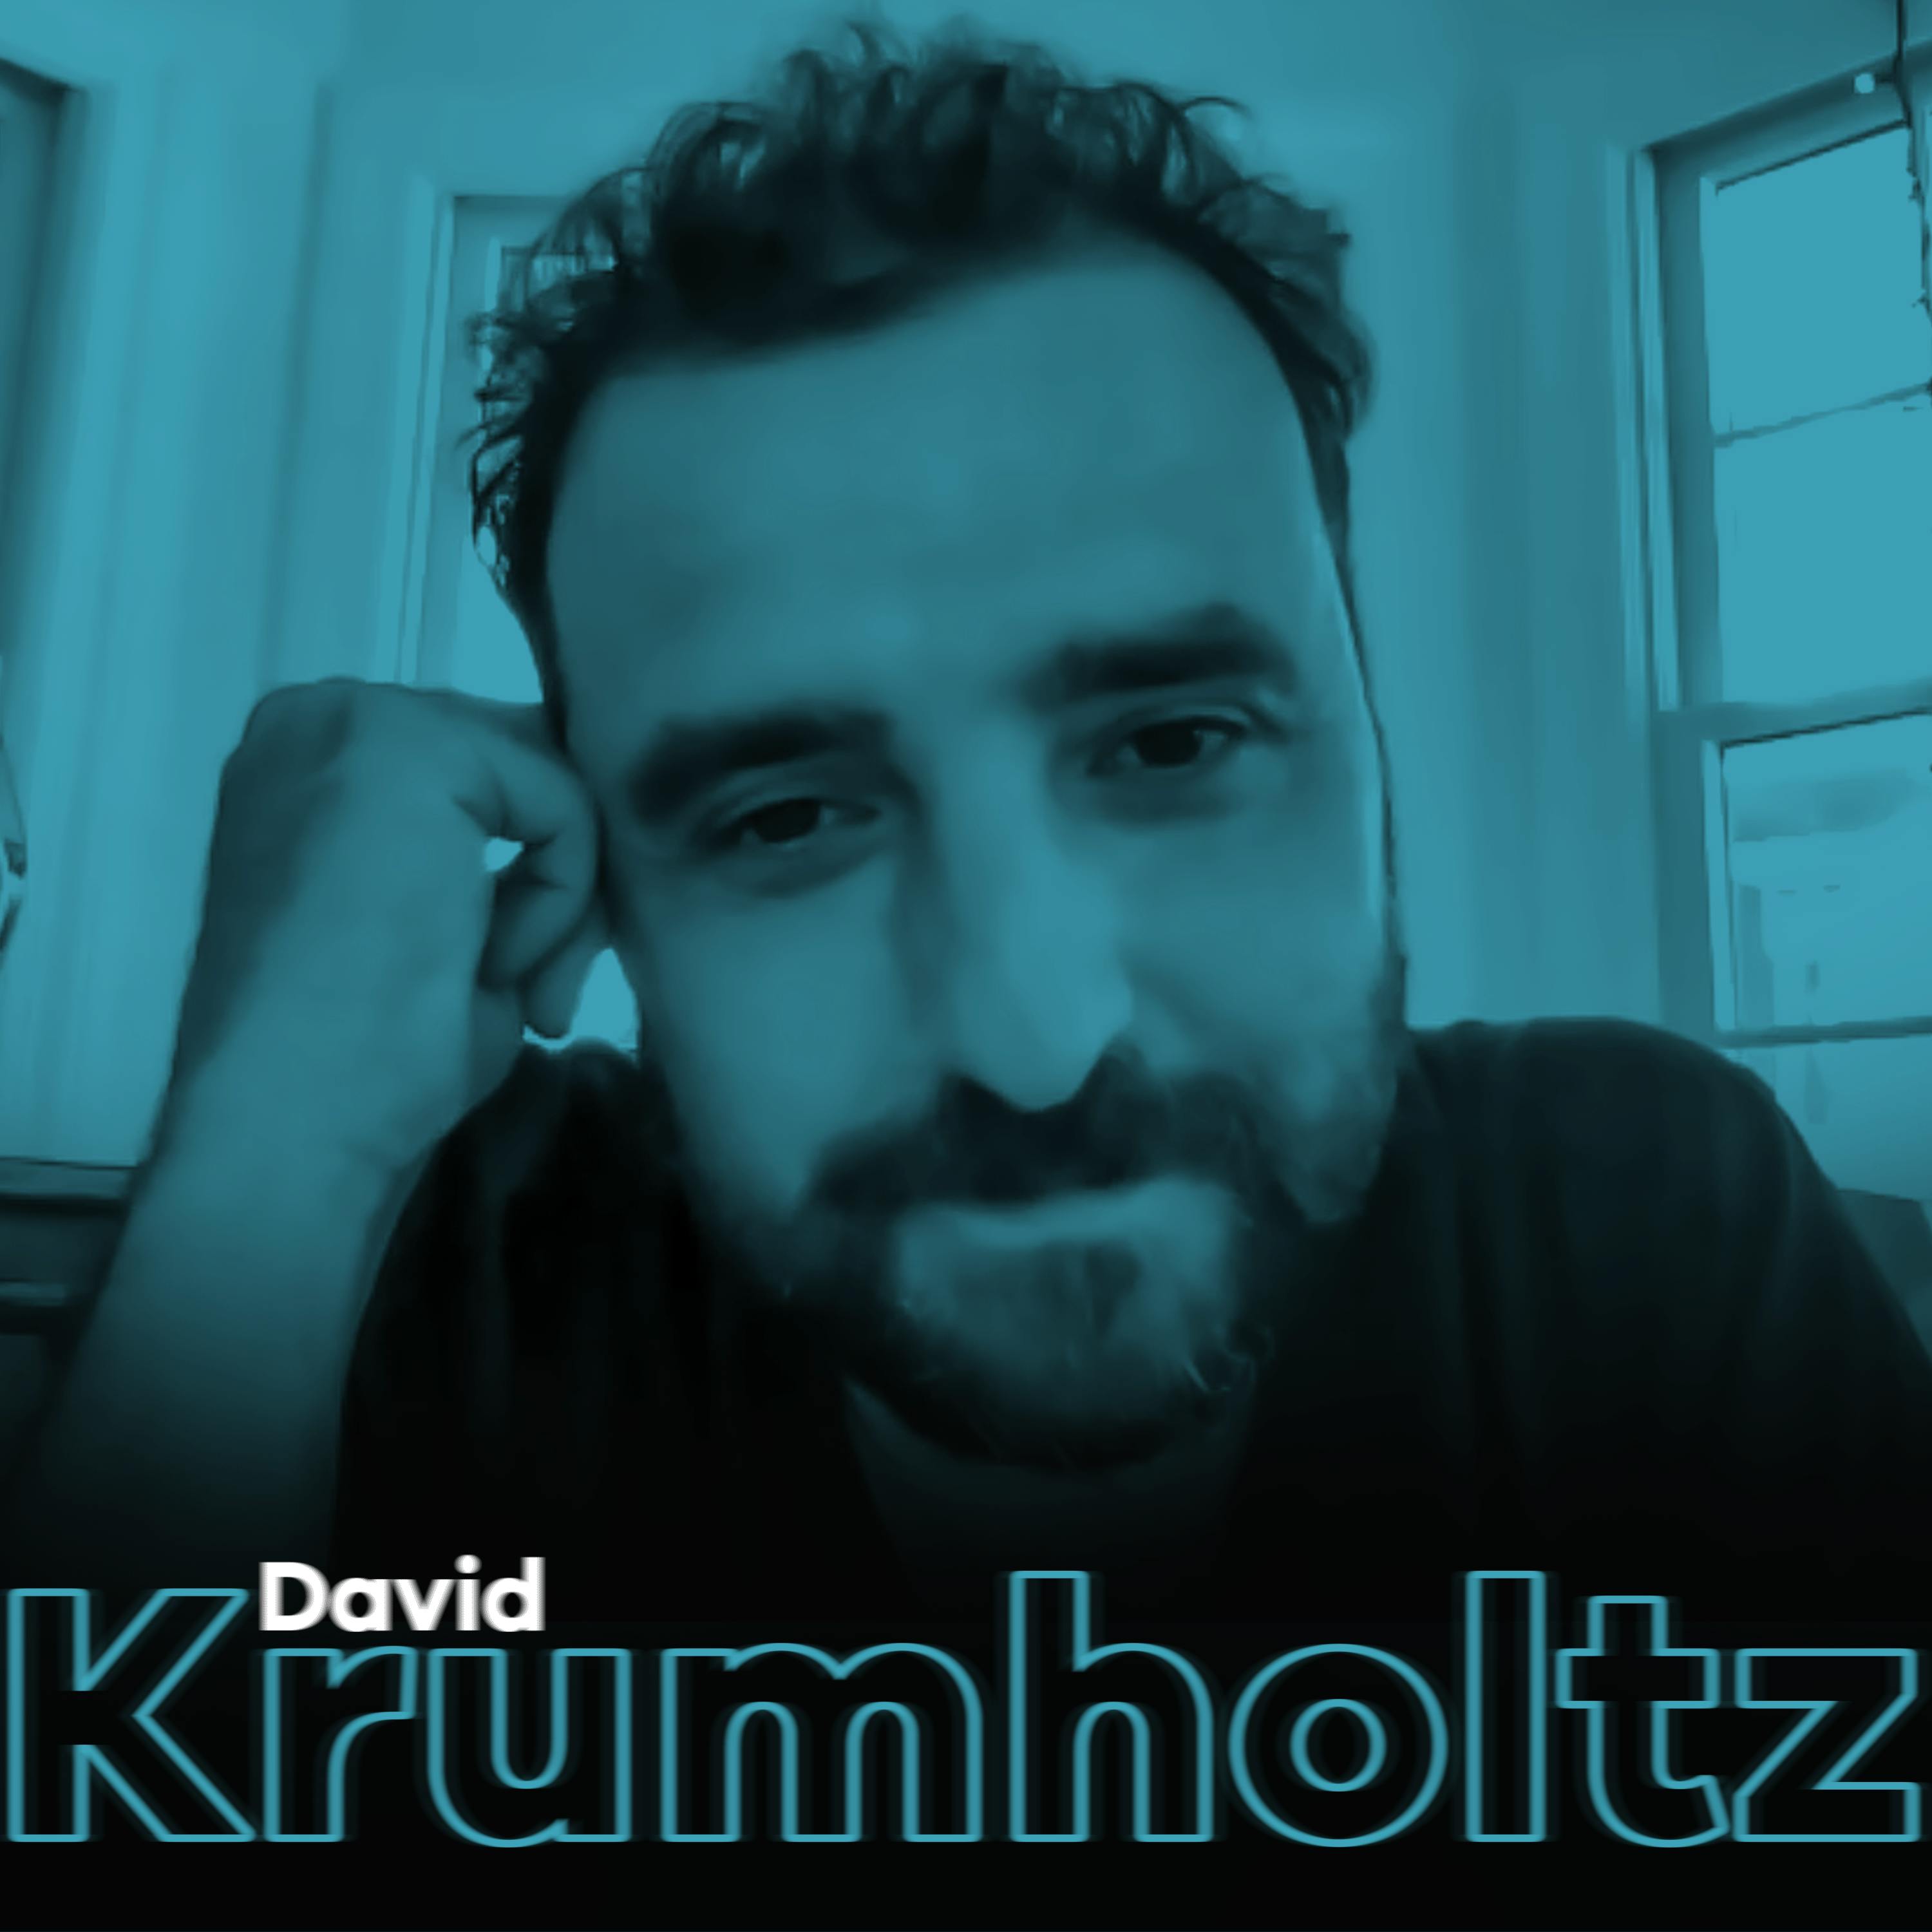 DAVID KRUMHOLTZ: Scary Oppenheimer Audition, Trouble on Numb3rs & 9 Month Mental Breakdown